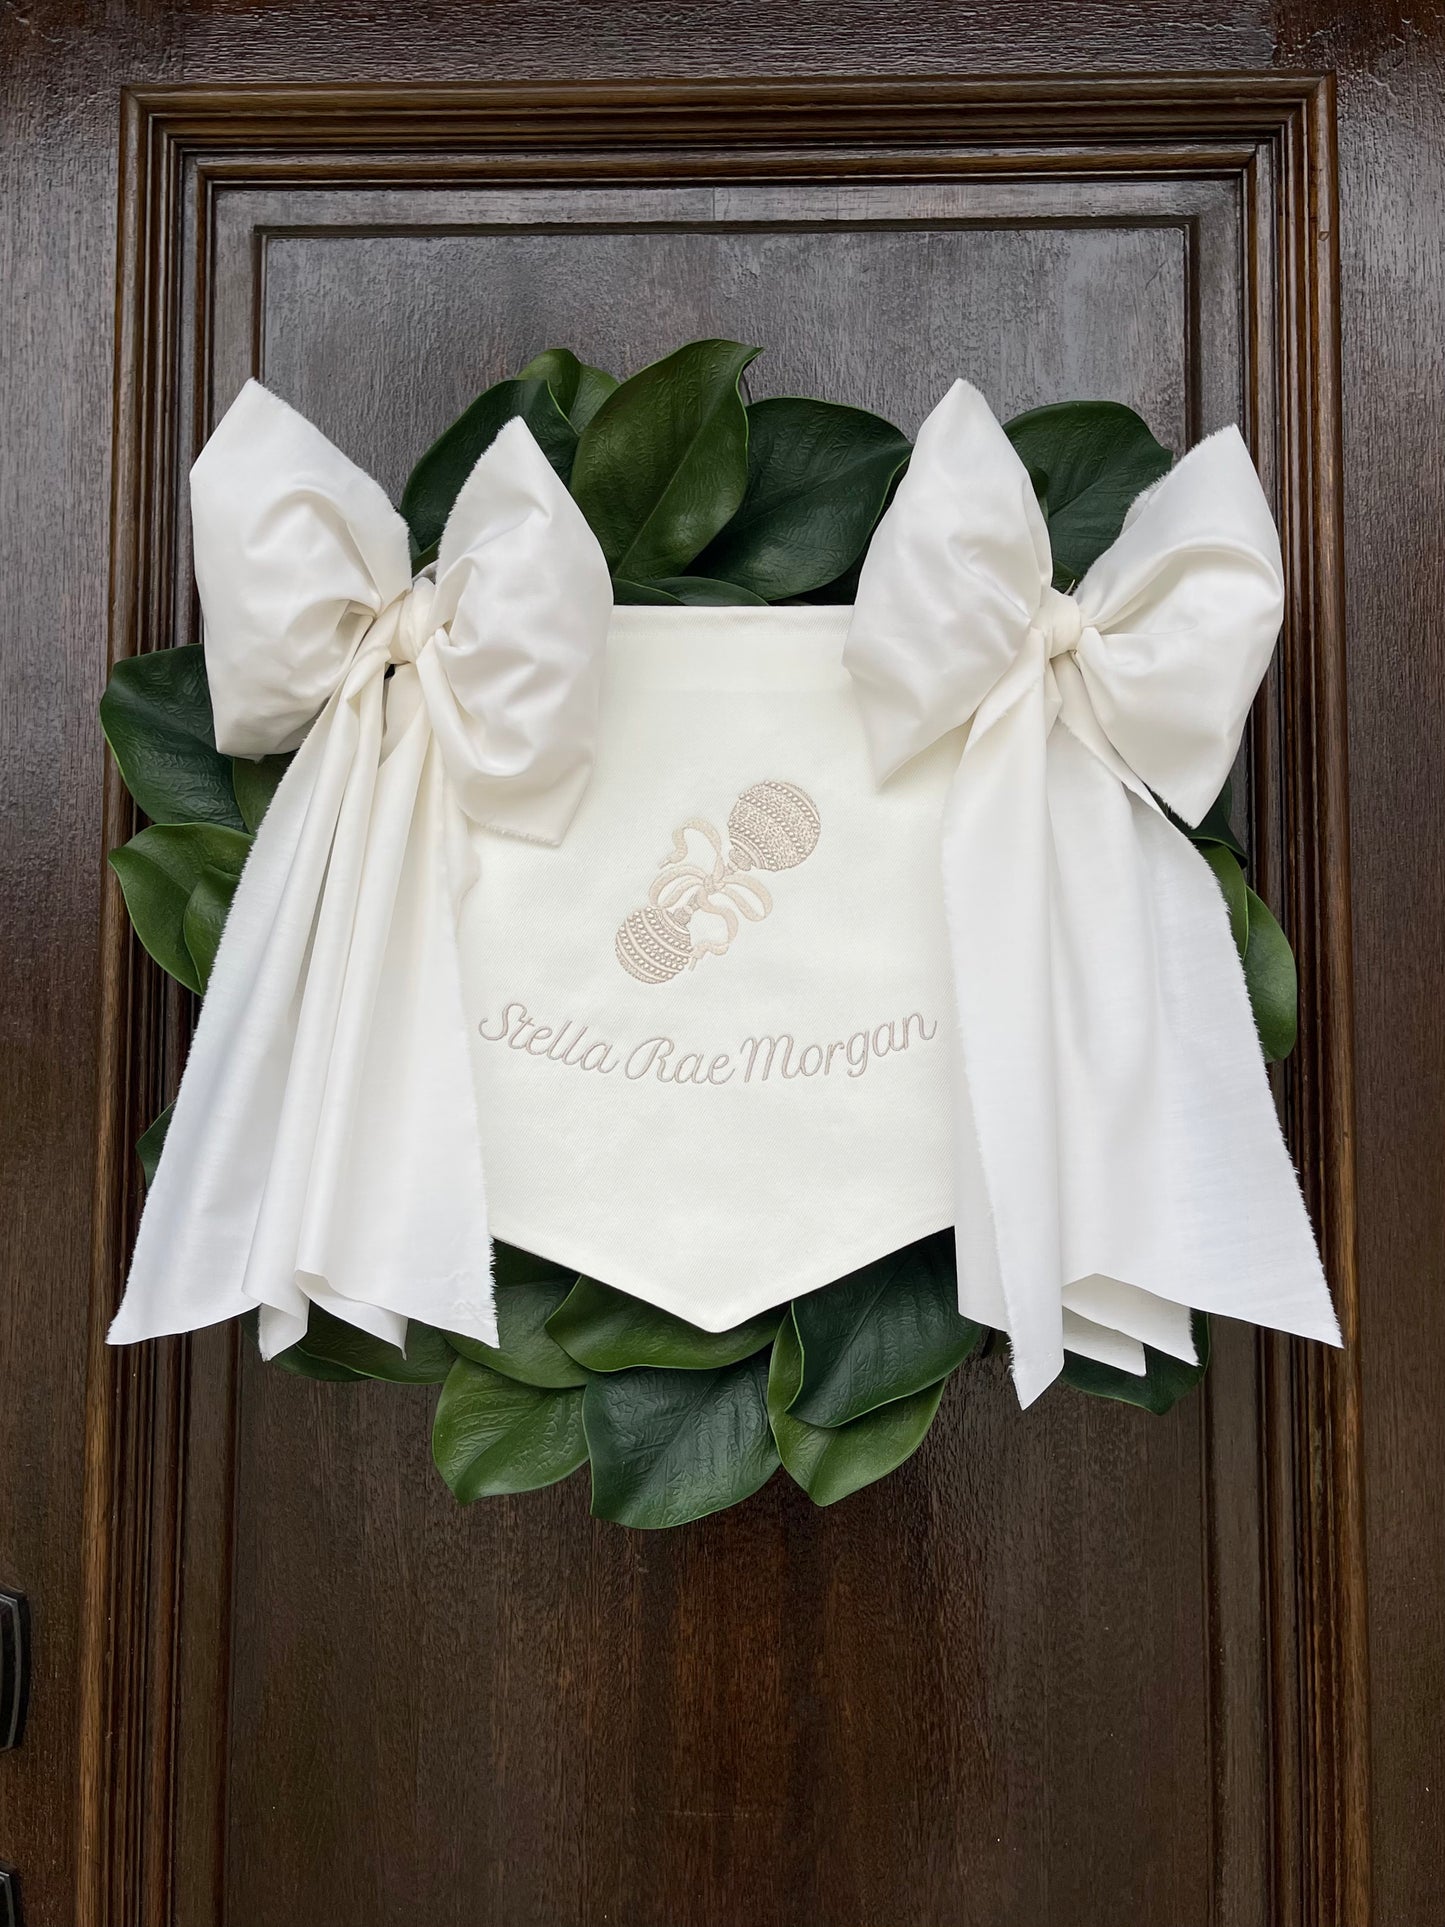 Baby Banner with Heirloom Rattle